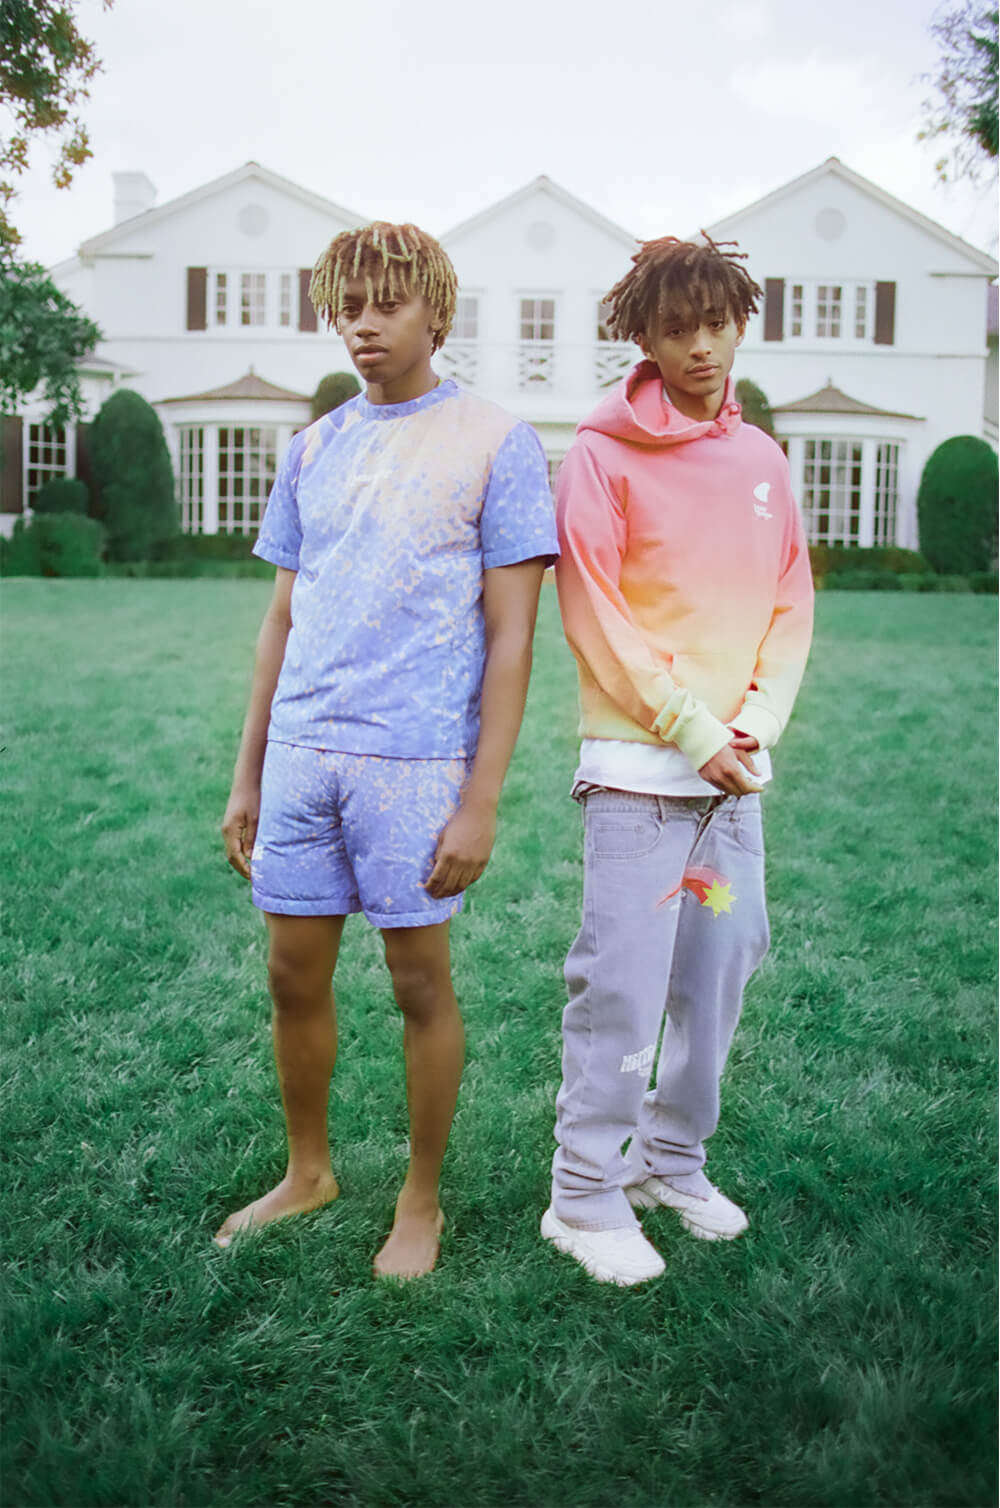 Jaden Smith on His Trippy Summer '22 Collection and the Power of